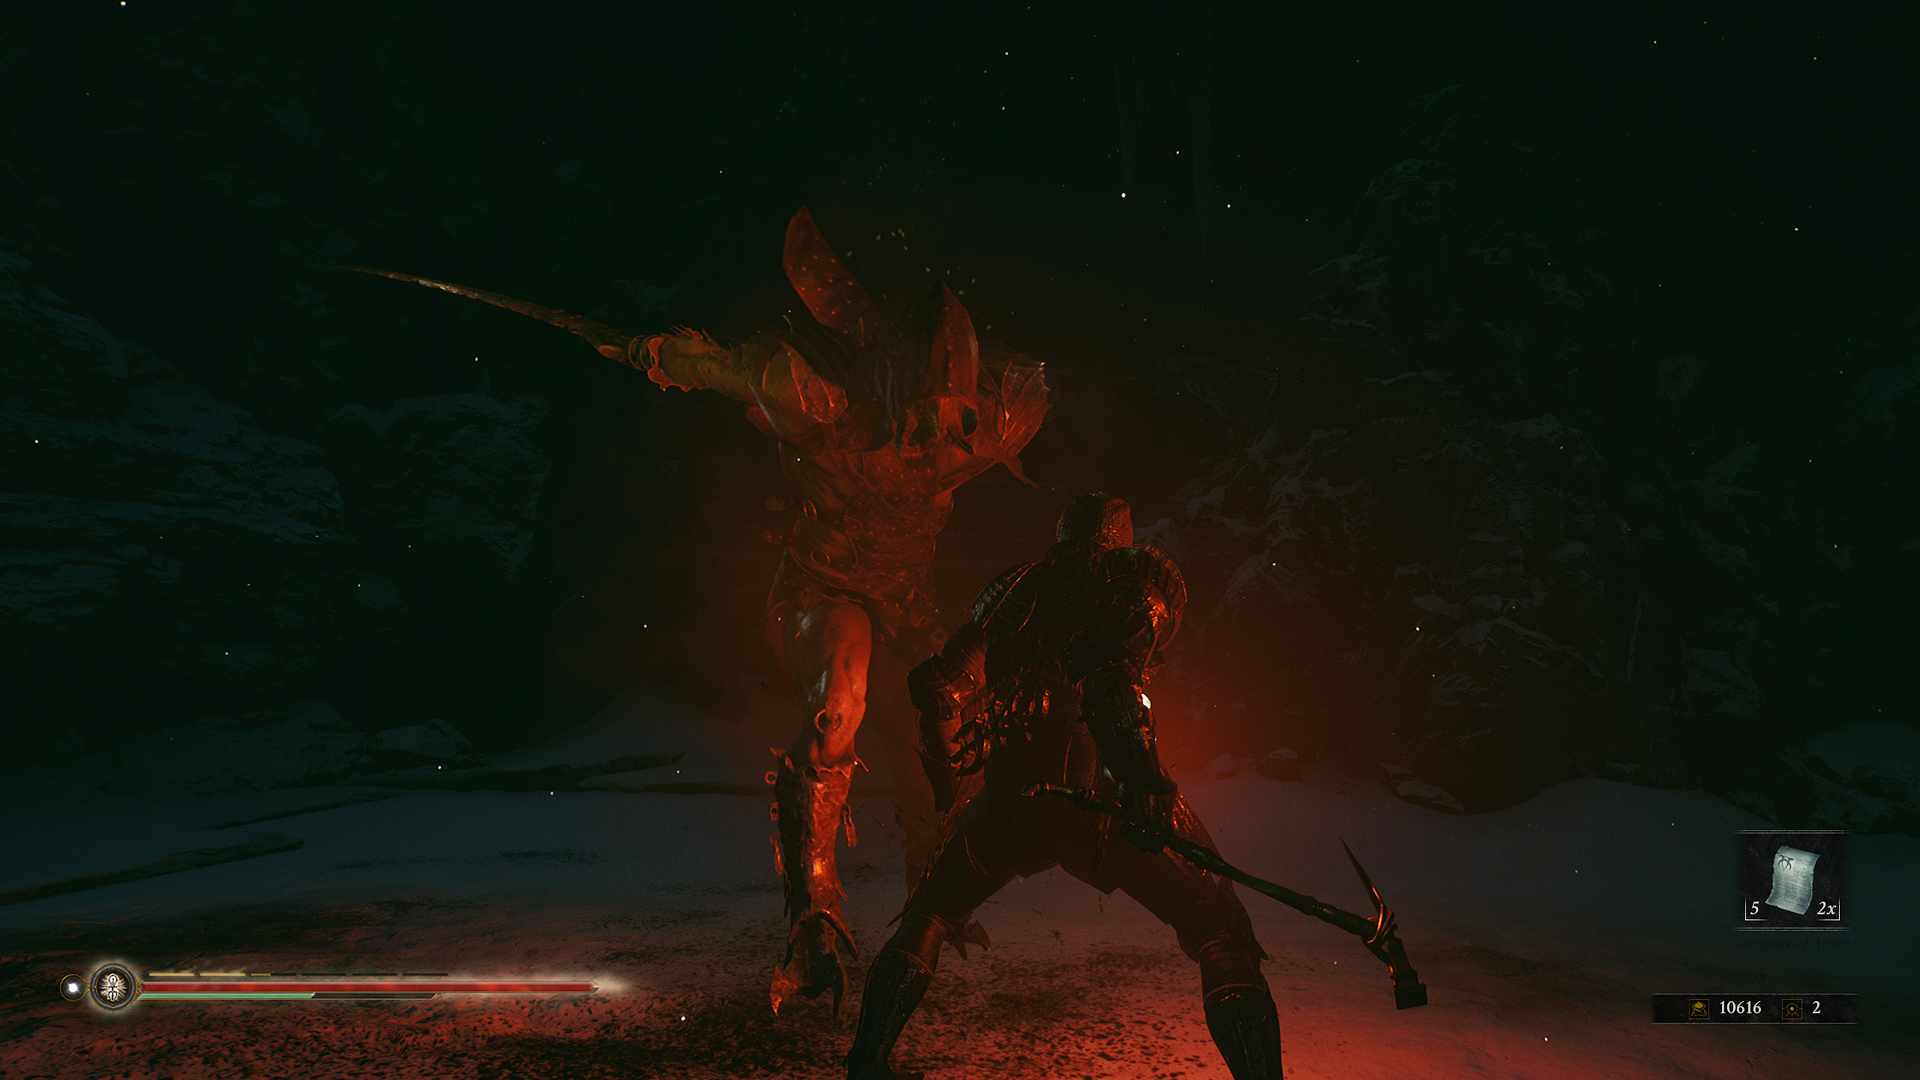 A huge armored enemy swinging their sword at the armored player character, who is glowing red